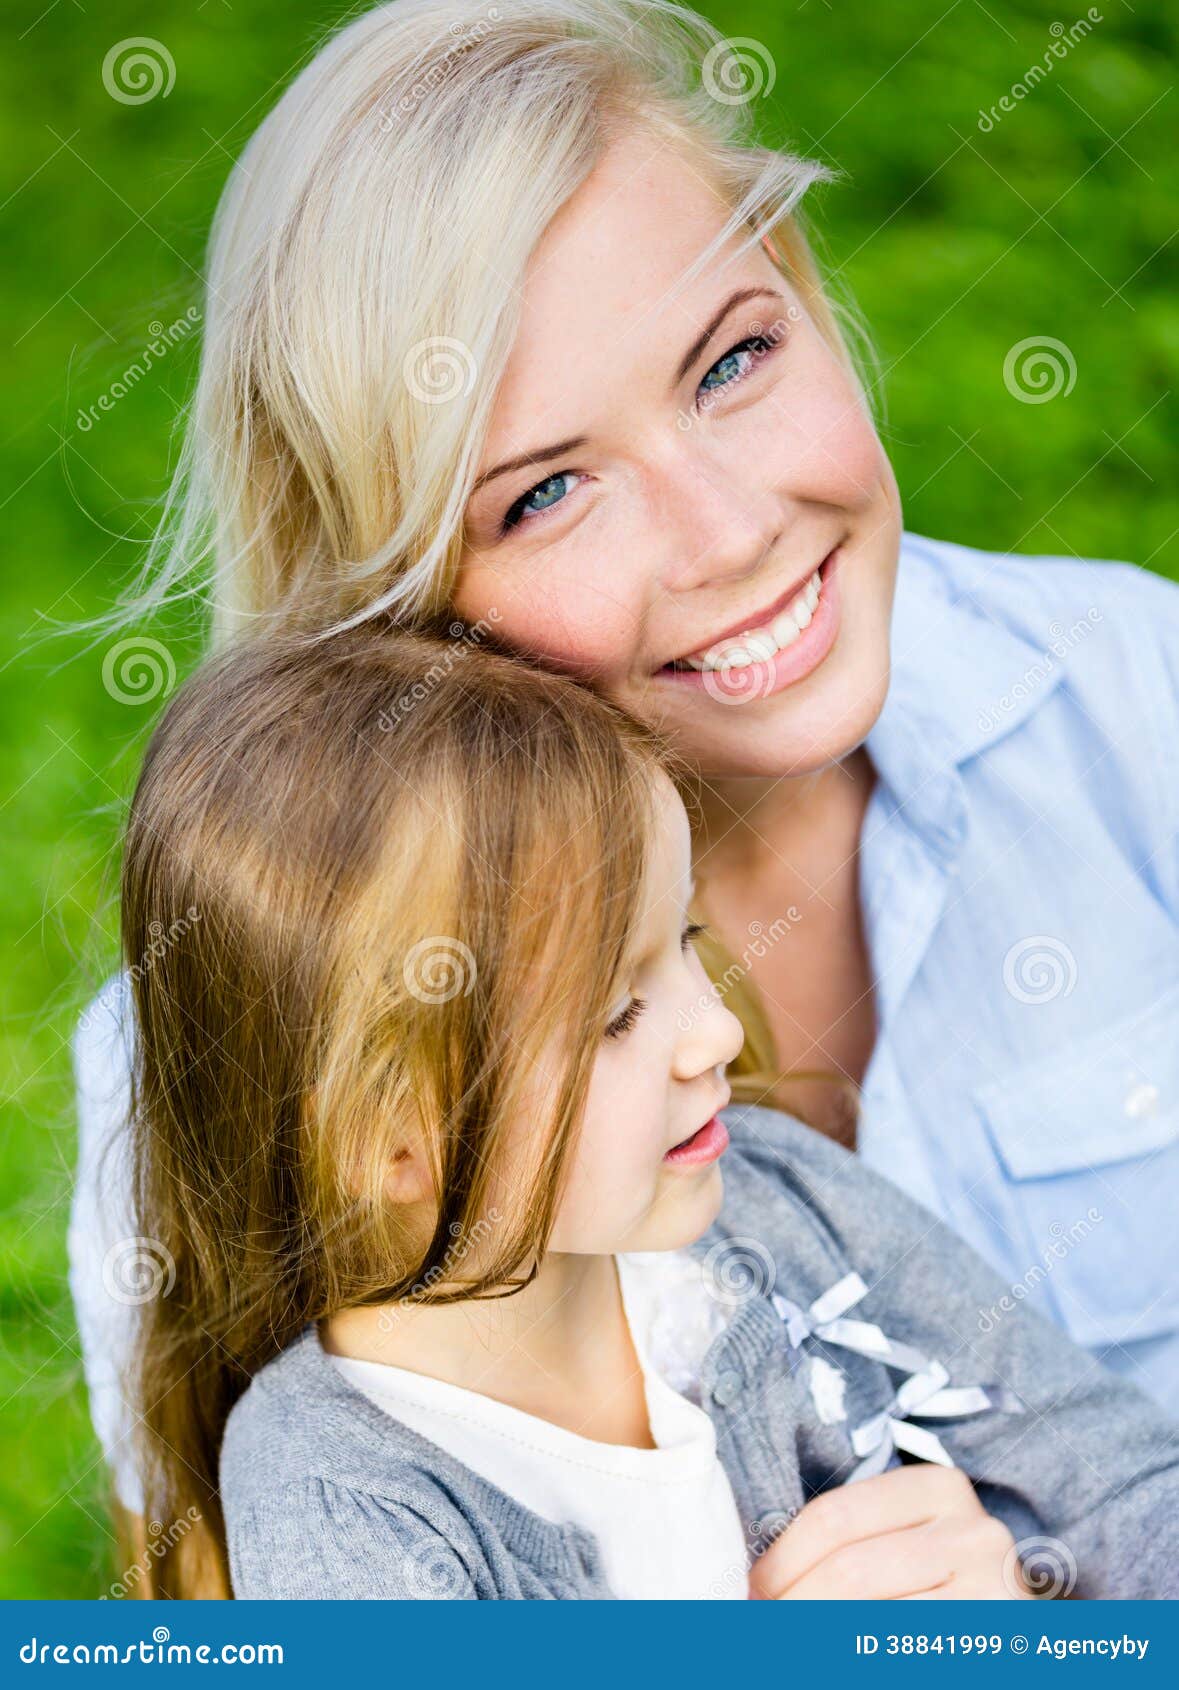 Mother And Daughter Embrace Each Other On The Grass Stock Image Image 